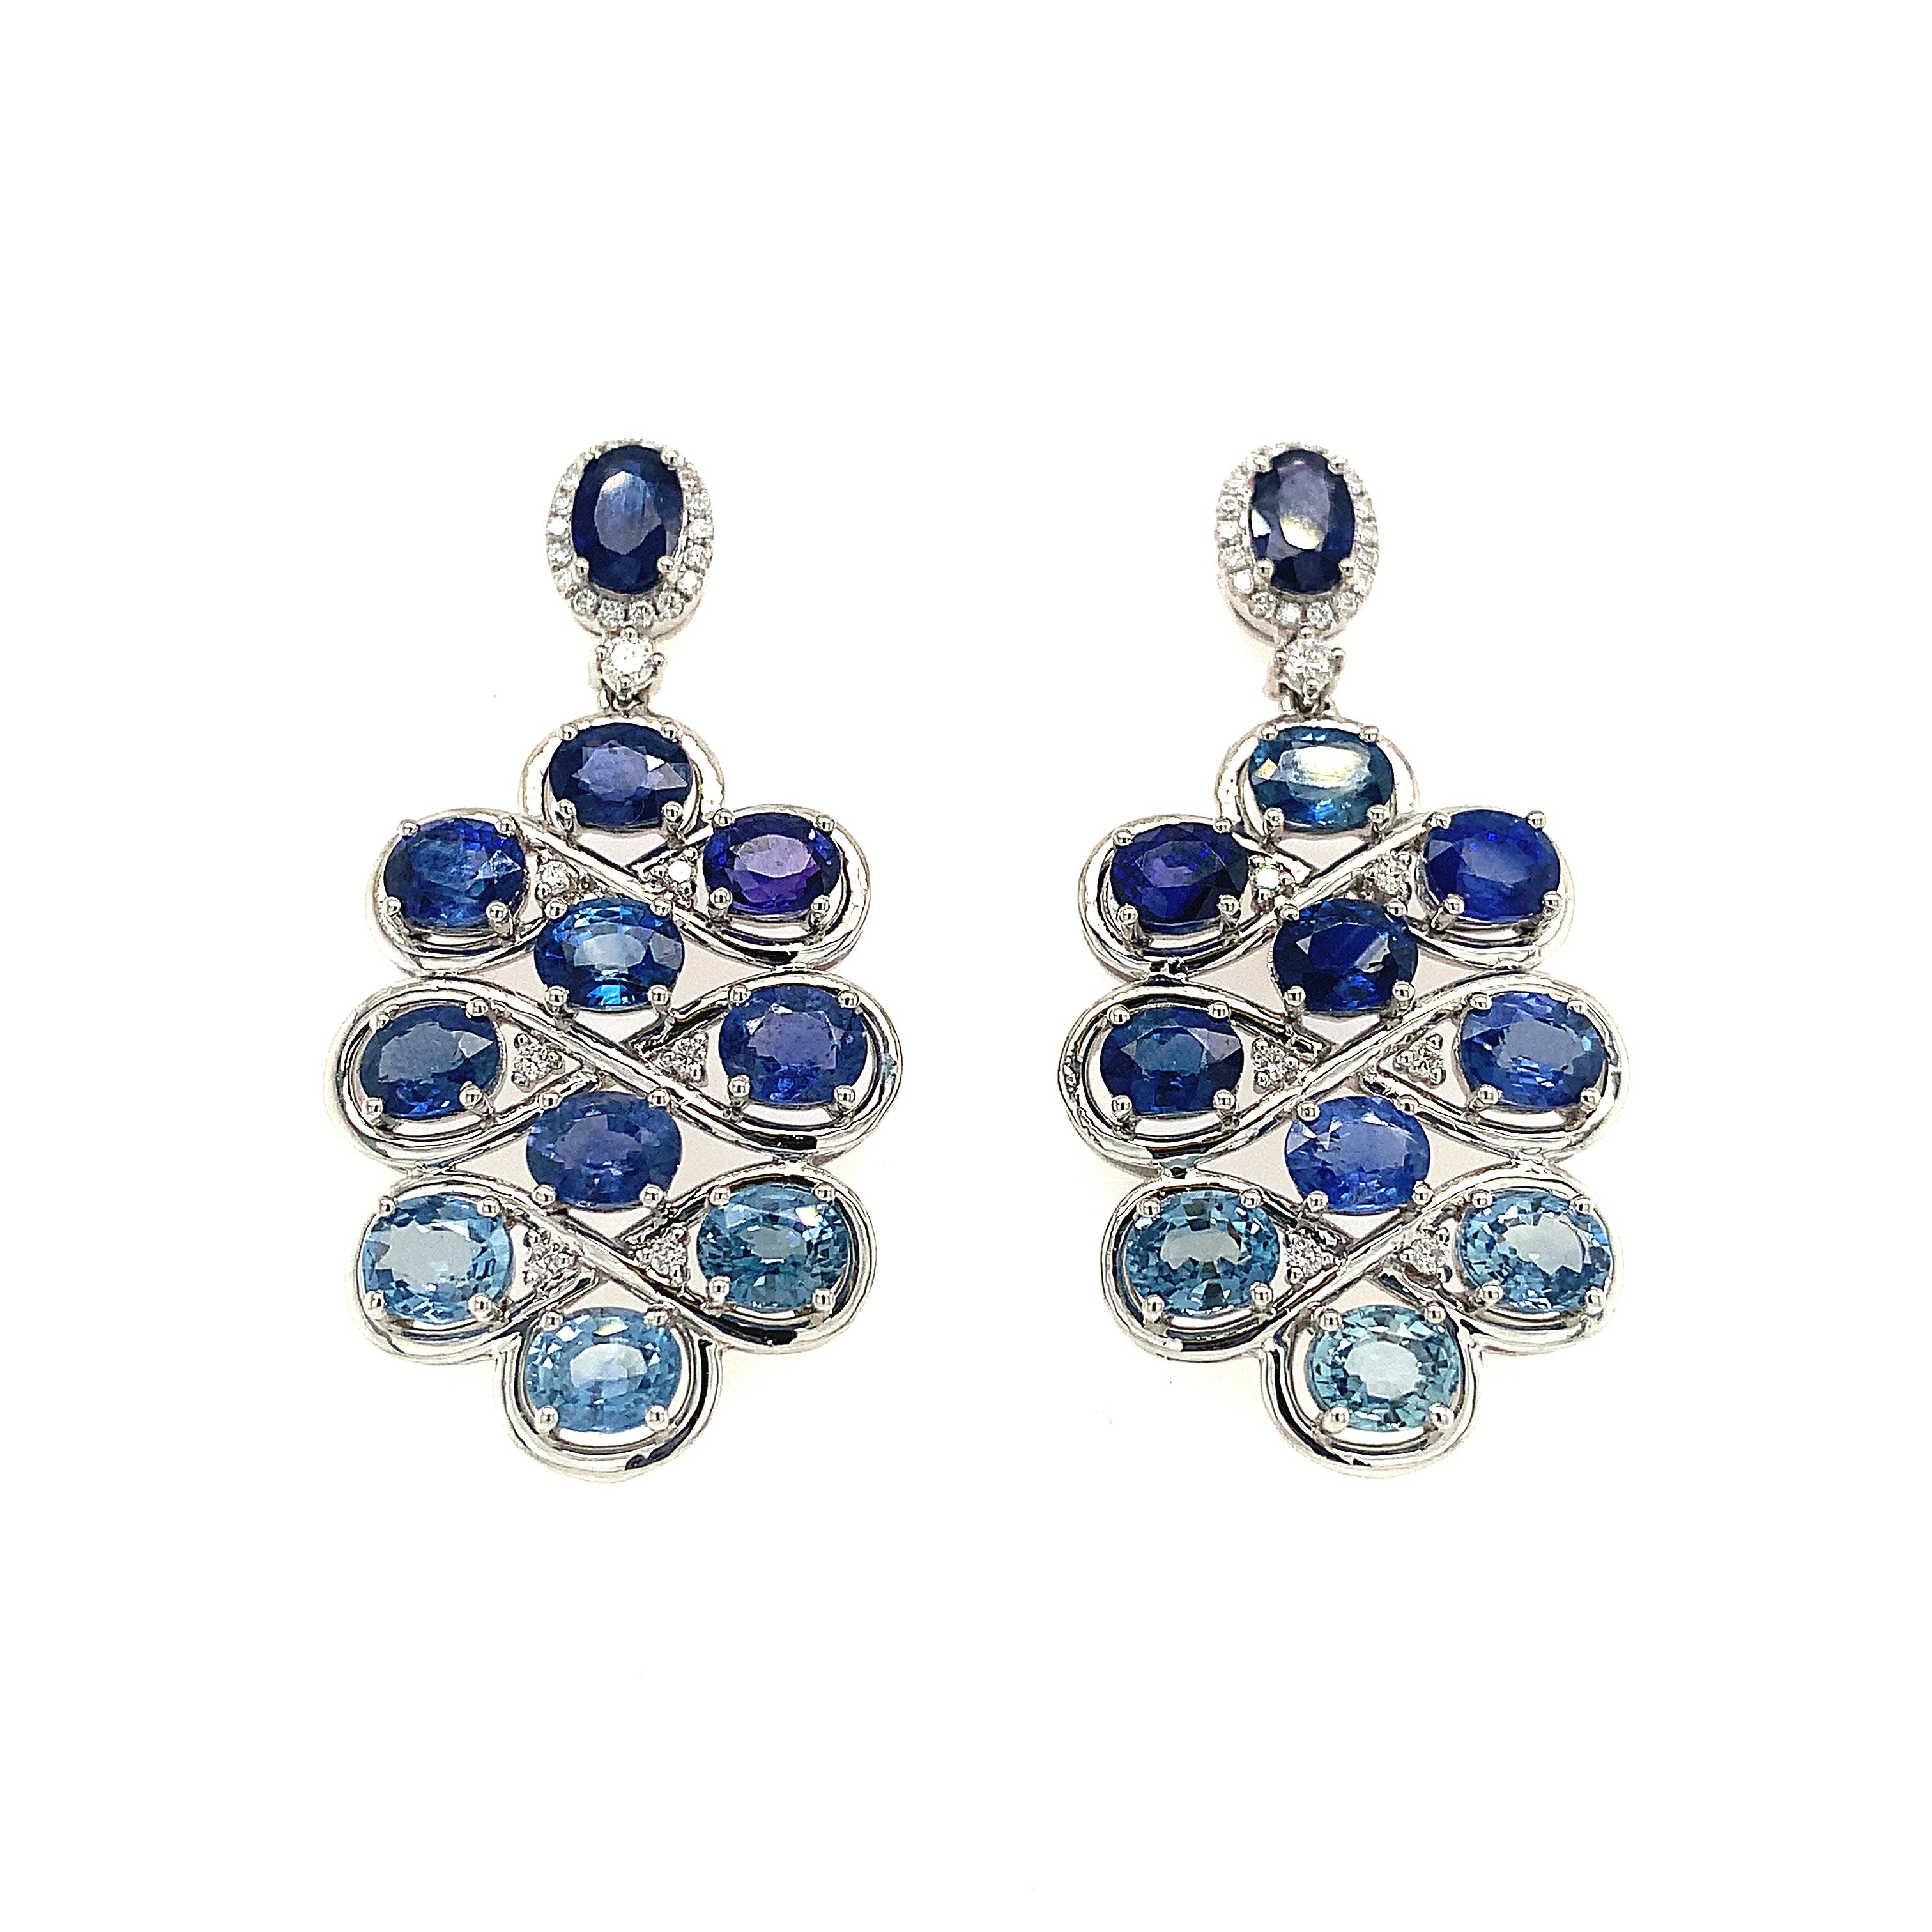 Ombre Collection
Blue Sapphire and Diamond  drop earrings  Set in 18K white gold. 

Blue Sapphire: 11.45ct total weight.
Diamonds: .30ct total weight.
All diamonds are G-H/SI stones.